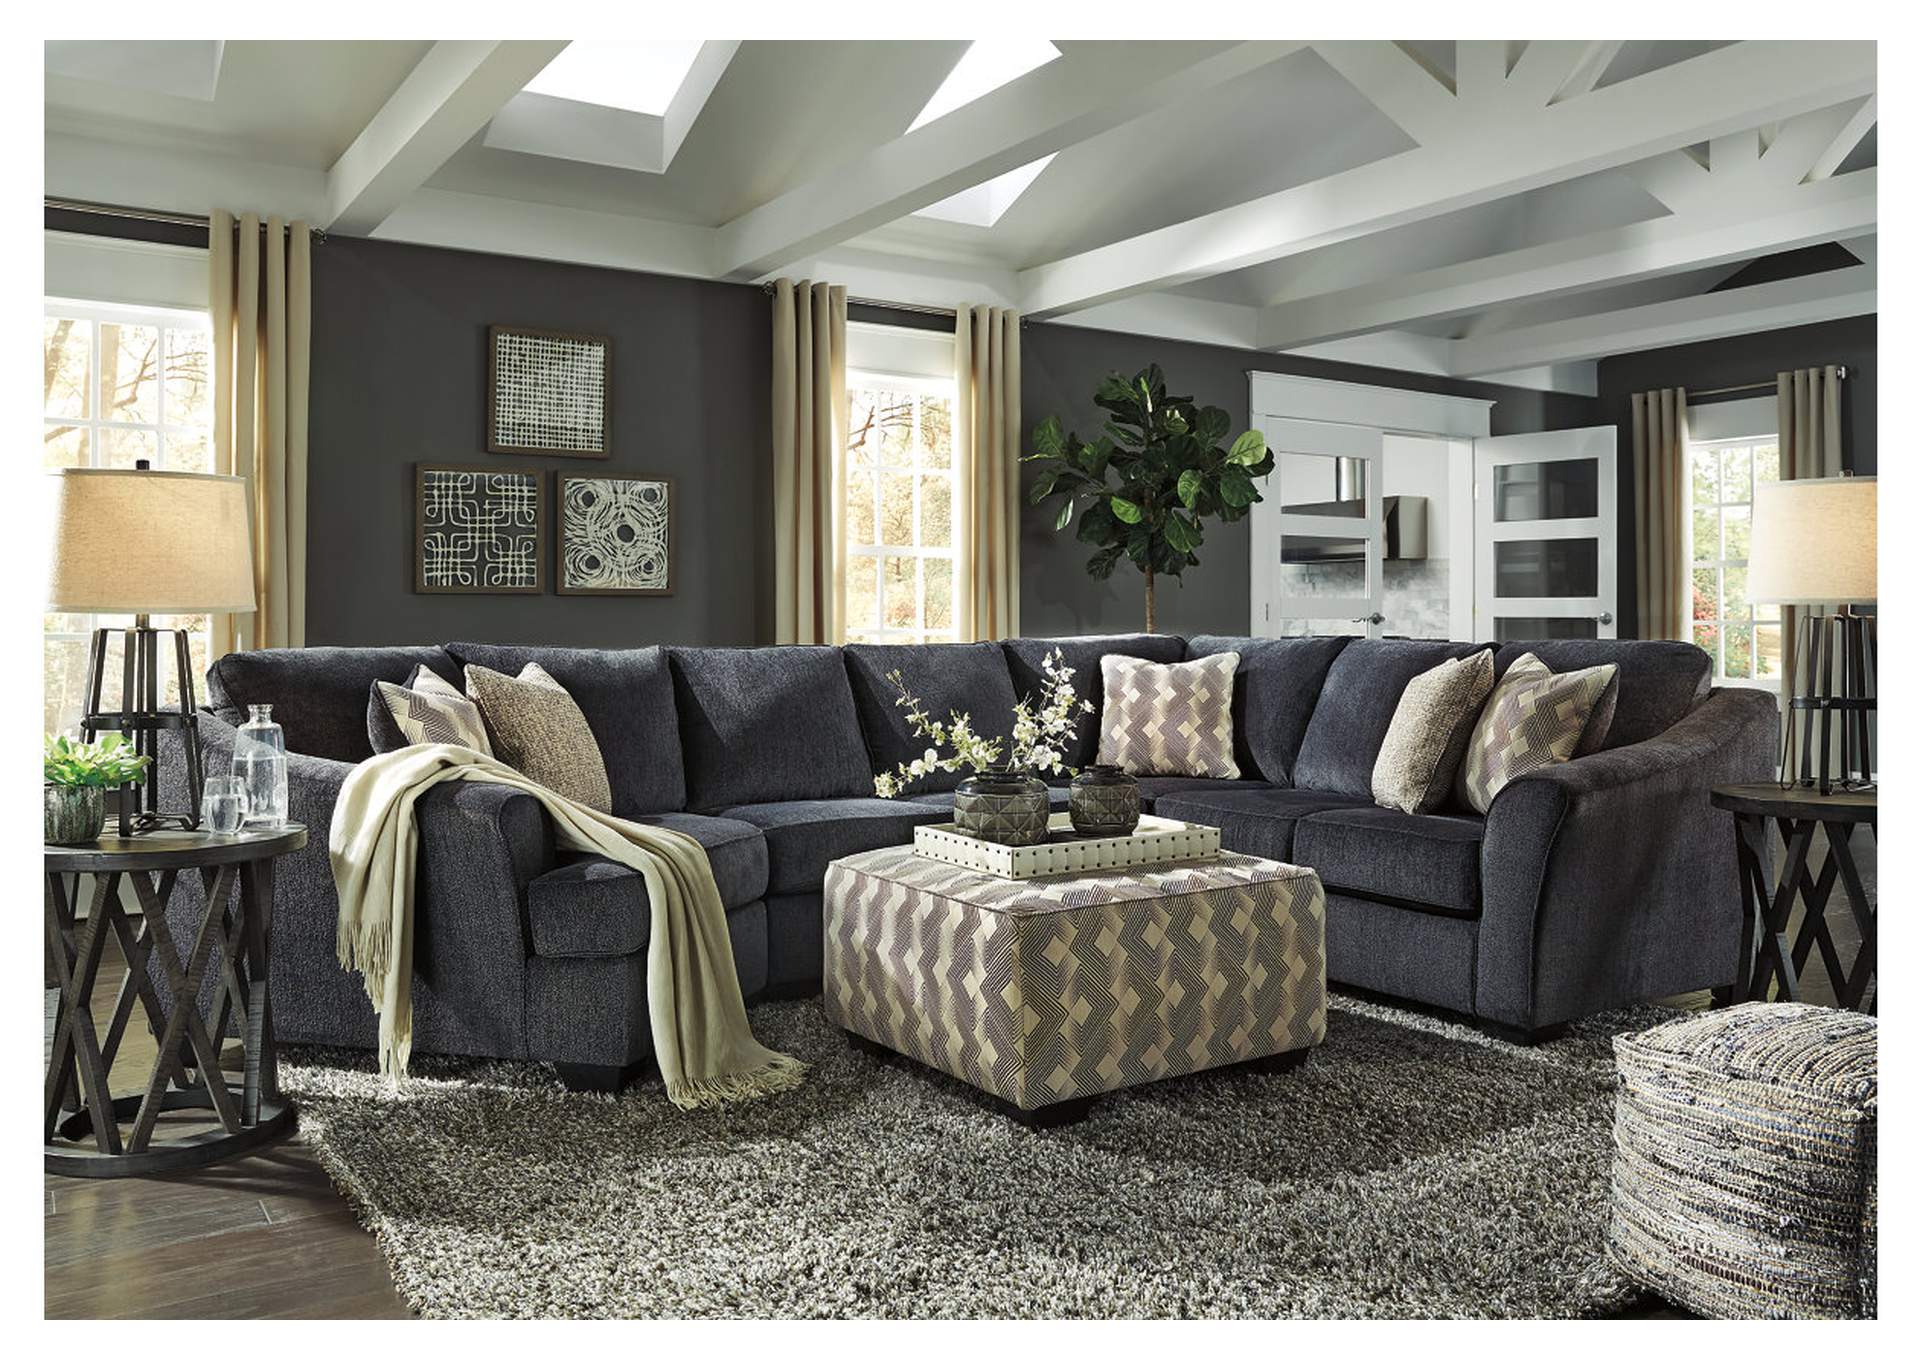 Eltmann 3-Piece Sectional with Ottoman,Signature Design By Ashley